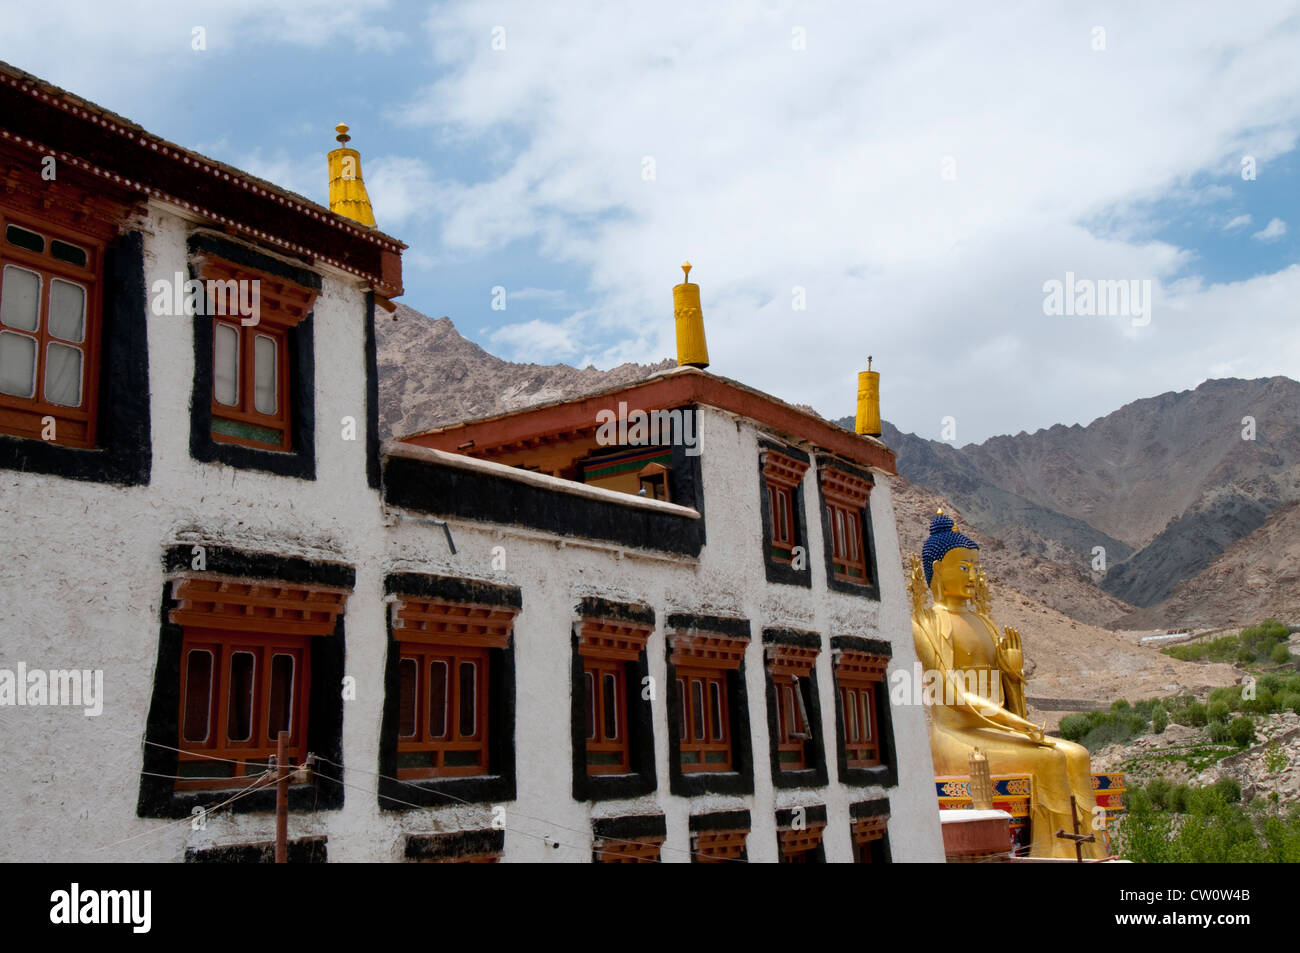 A Likir Monastery building and the 75 foot gold statue of Maitreya in Ladakh, India. Stock Photo